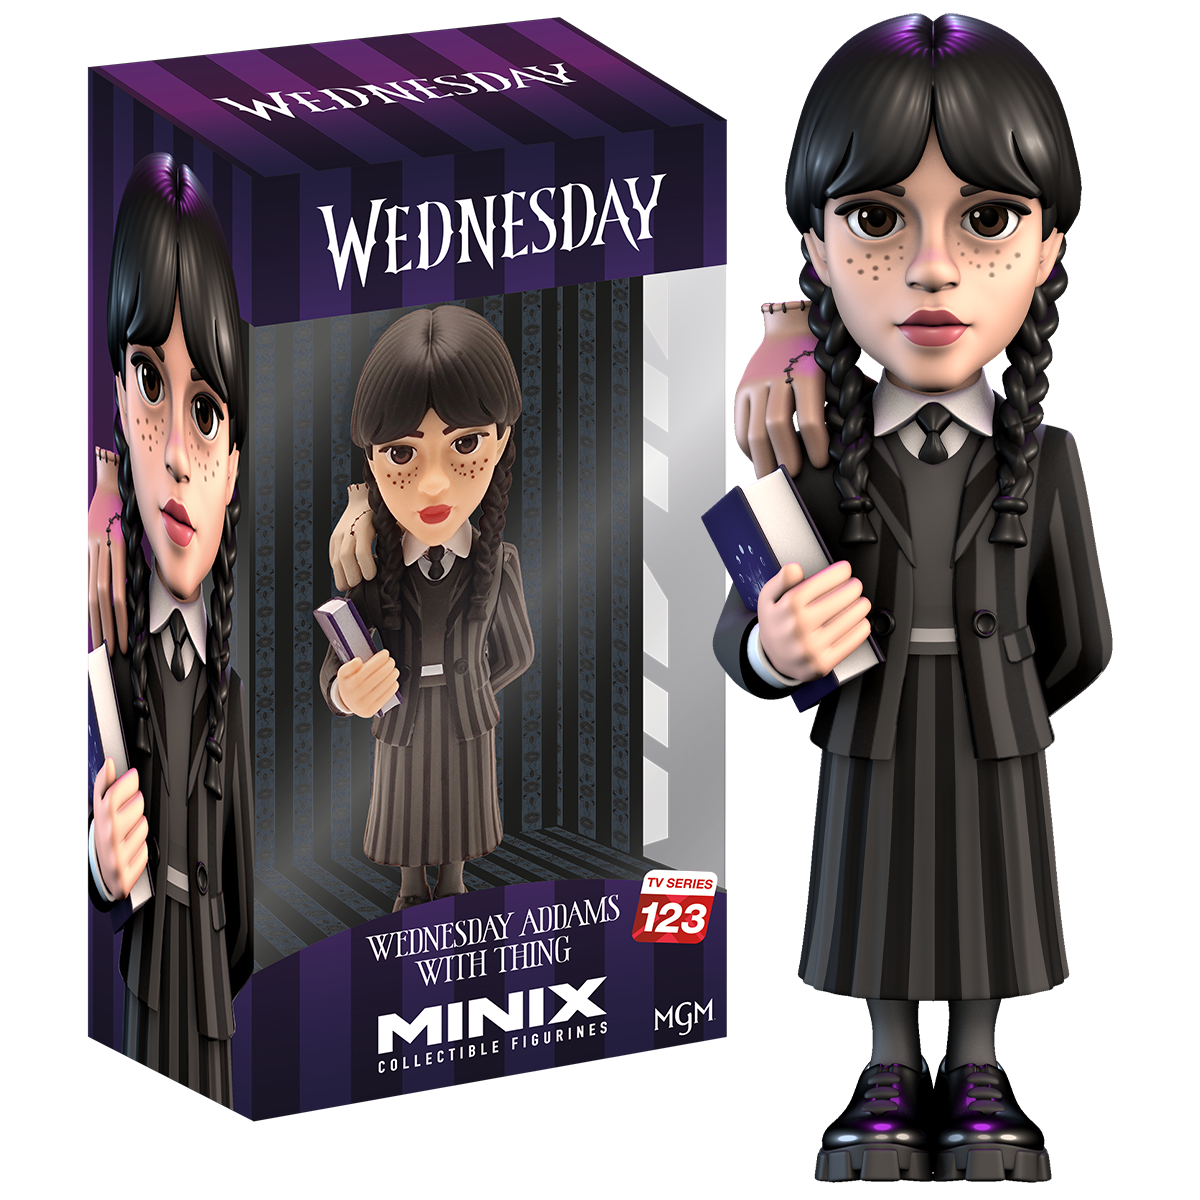 Minix collectible figurines - wednesday addams new - Toys Center